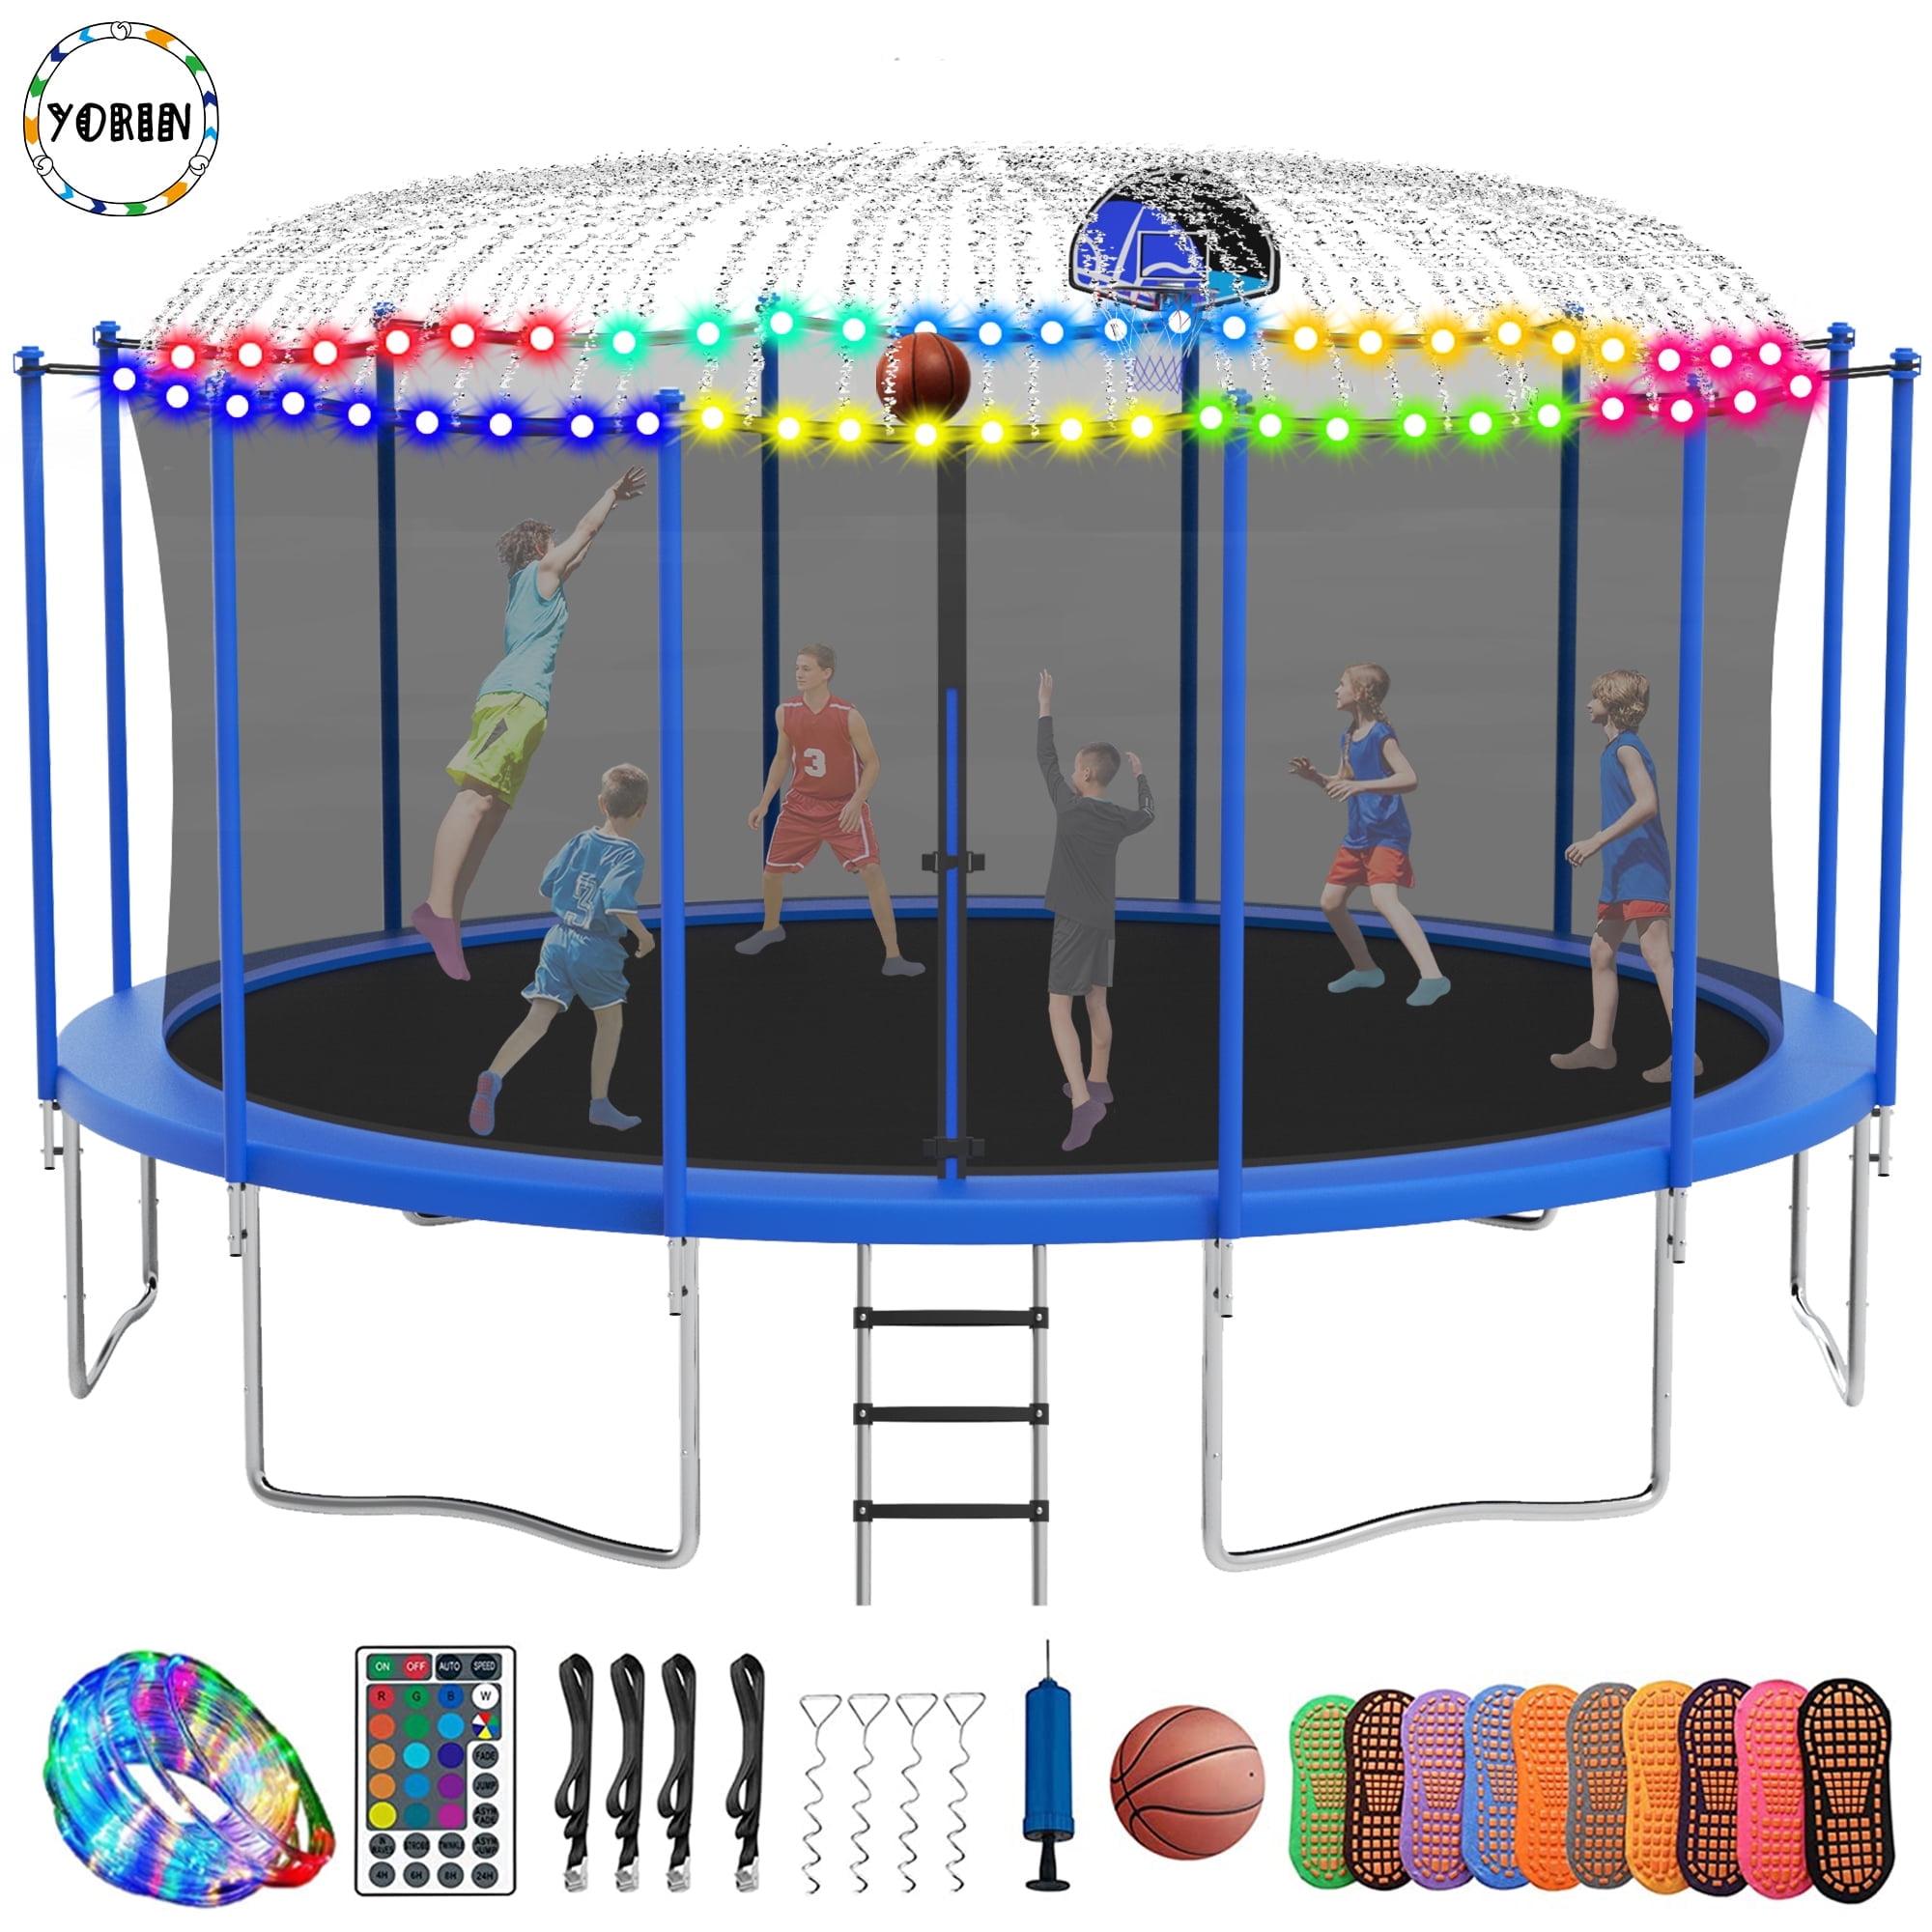 First Play 45 inch / 114cm Fitness Trampoline for Kids & Adults I